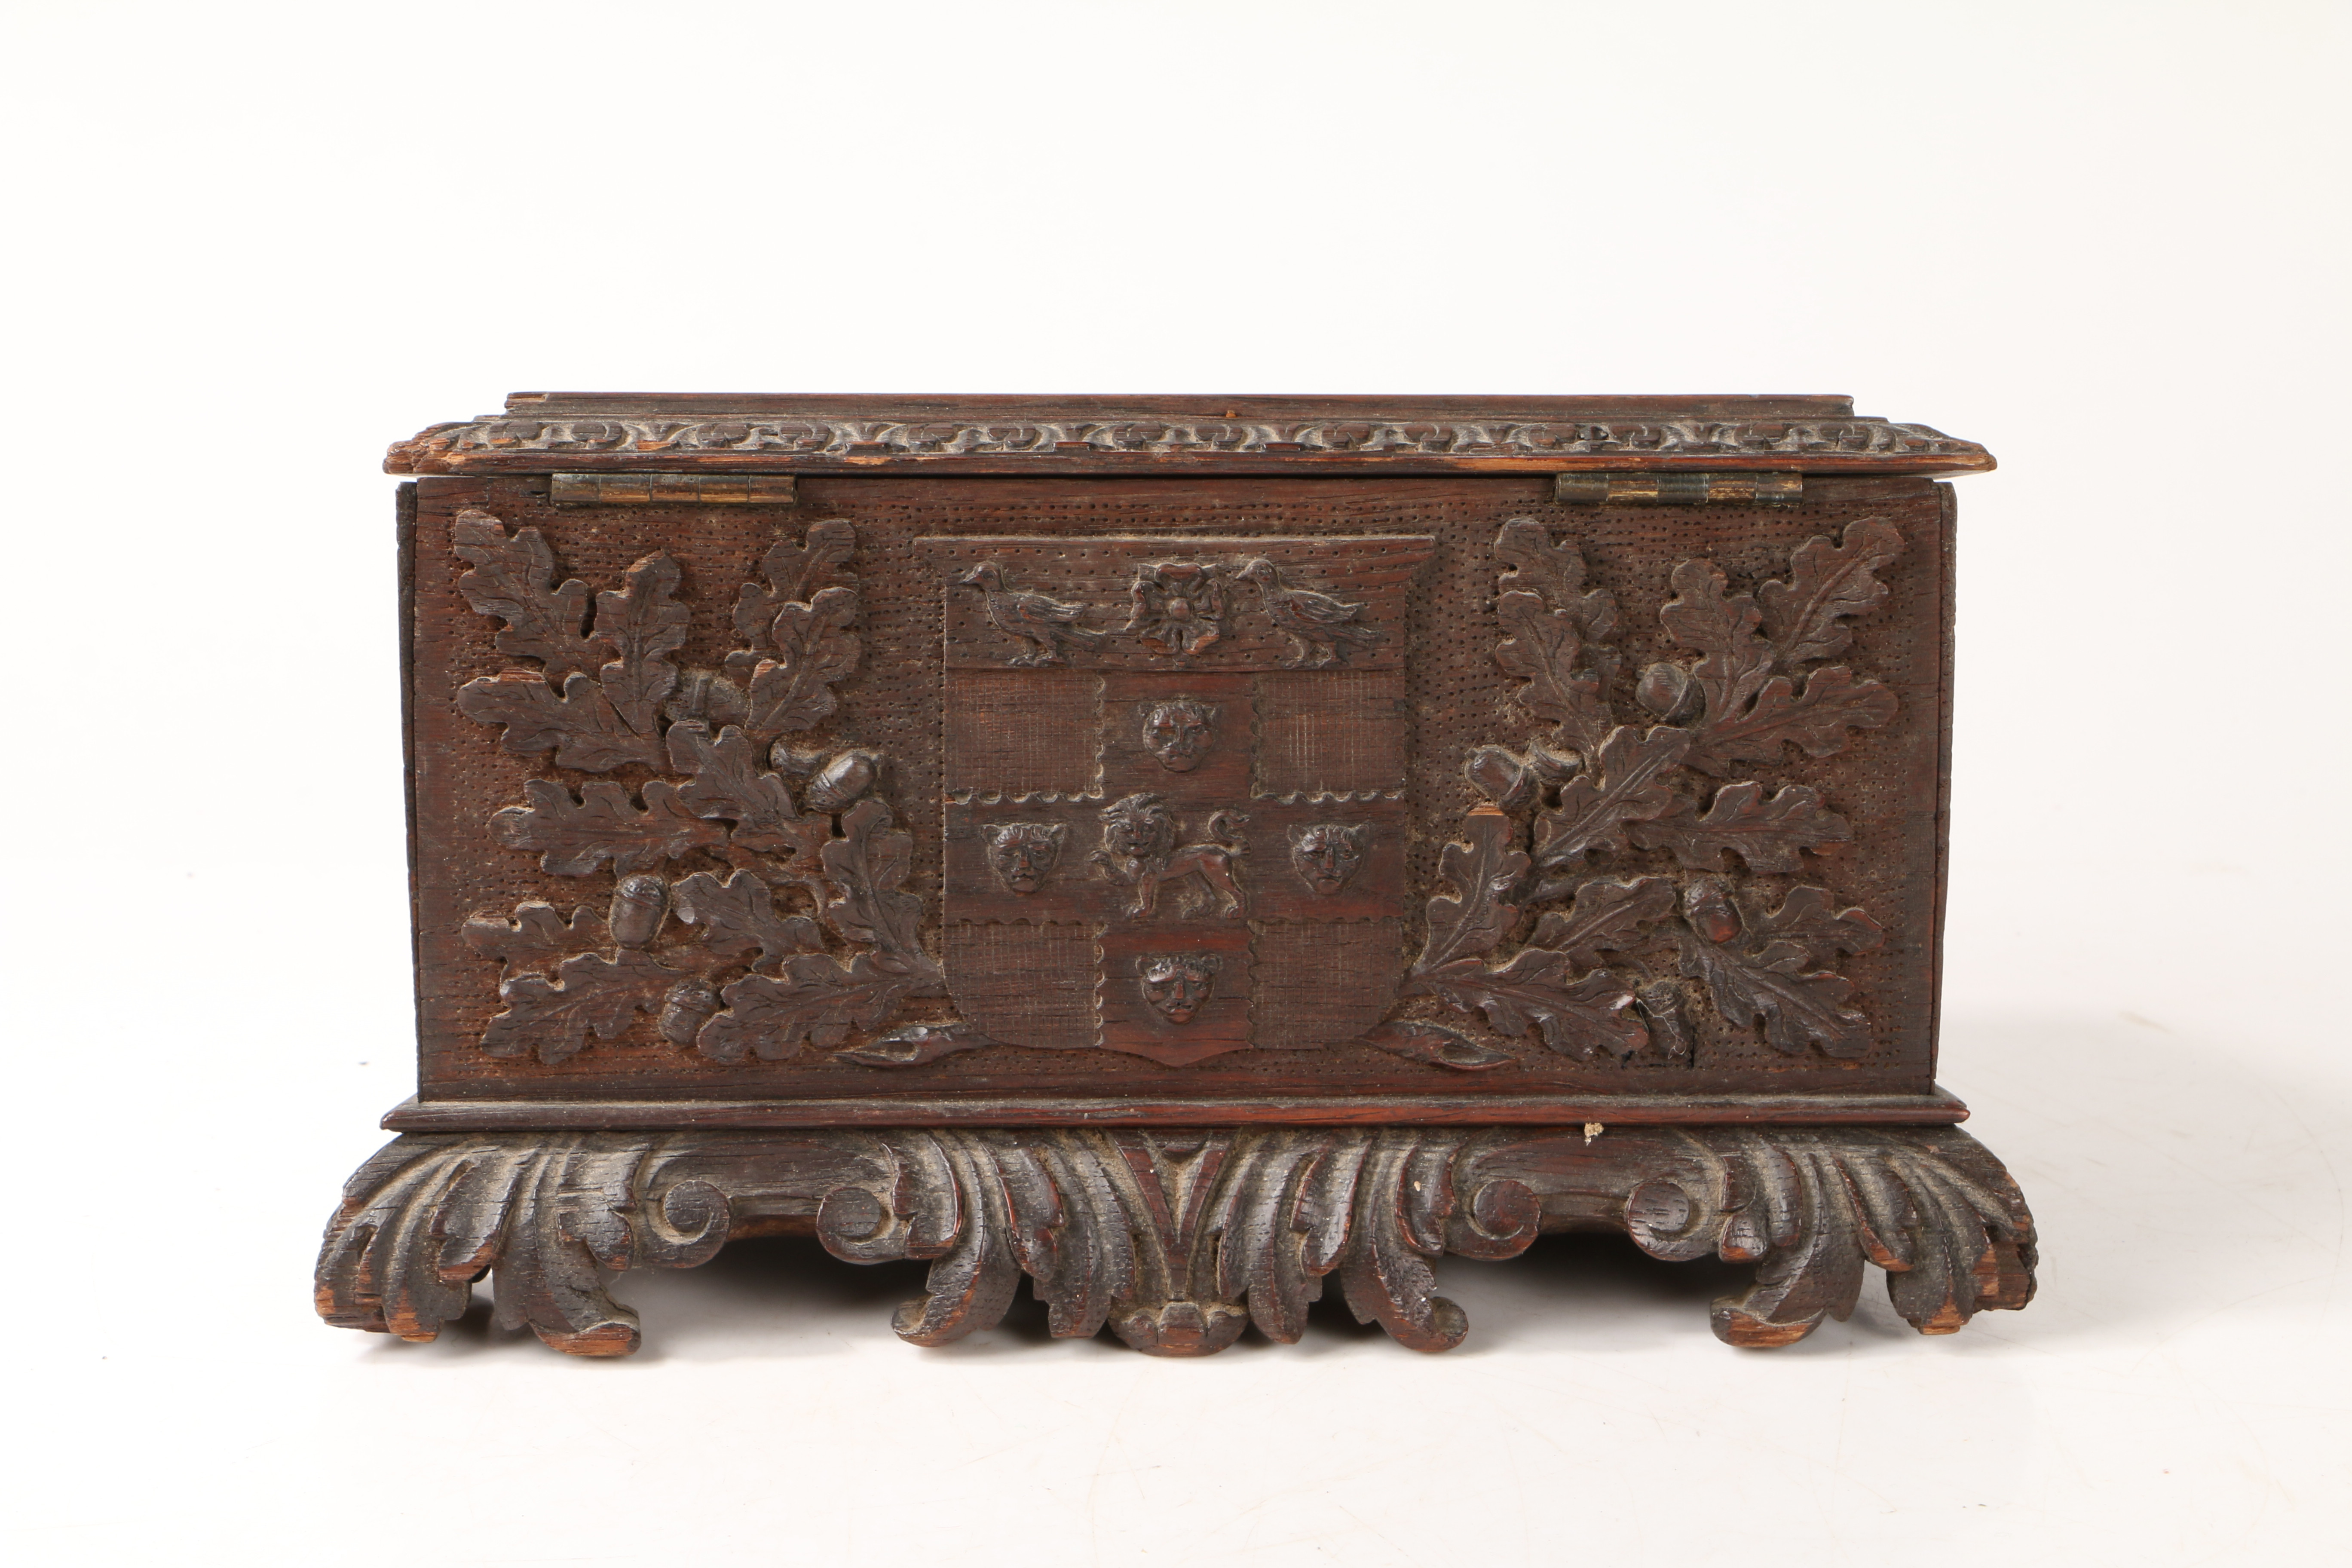 CHRIST CHURCH INTEREST - A 19TH CENTURY CARVED OAK BOX. - Image 5 of 10